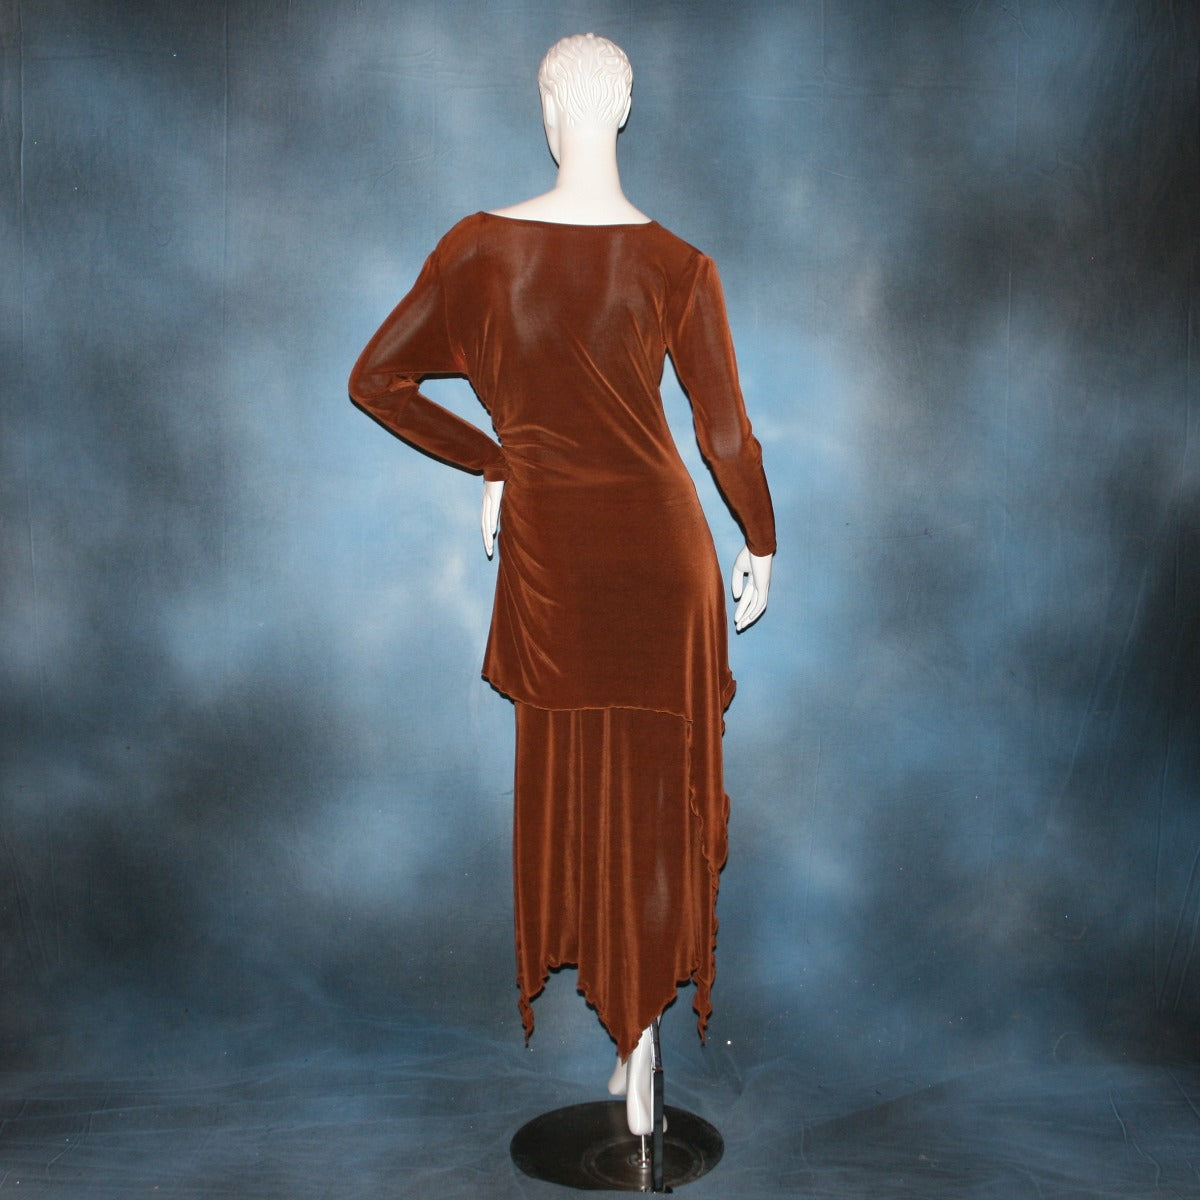 back view of Cinnamon brown long sleeve angle cut tunic top includes A-line skirt with angle cuts of cinnamon brown colored solid slinky fabric, of which the tunic top can be worn as a simple Latin/rhythm dress... can be custom created in many colors.